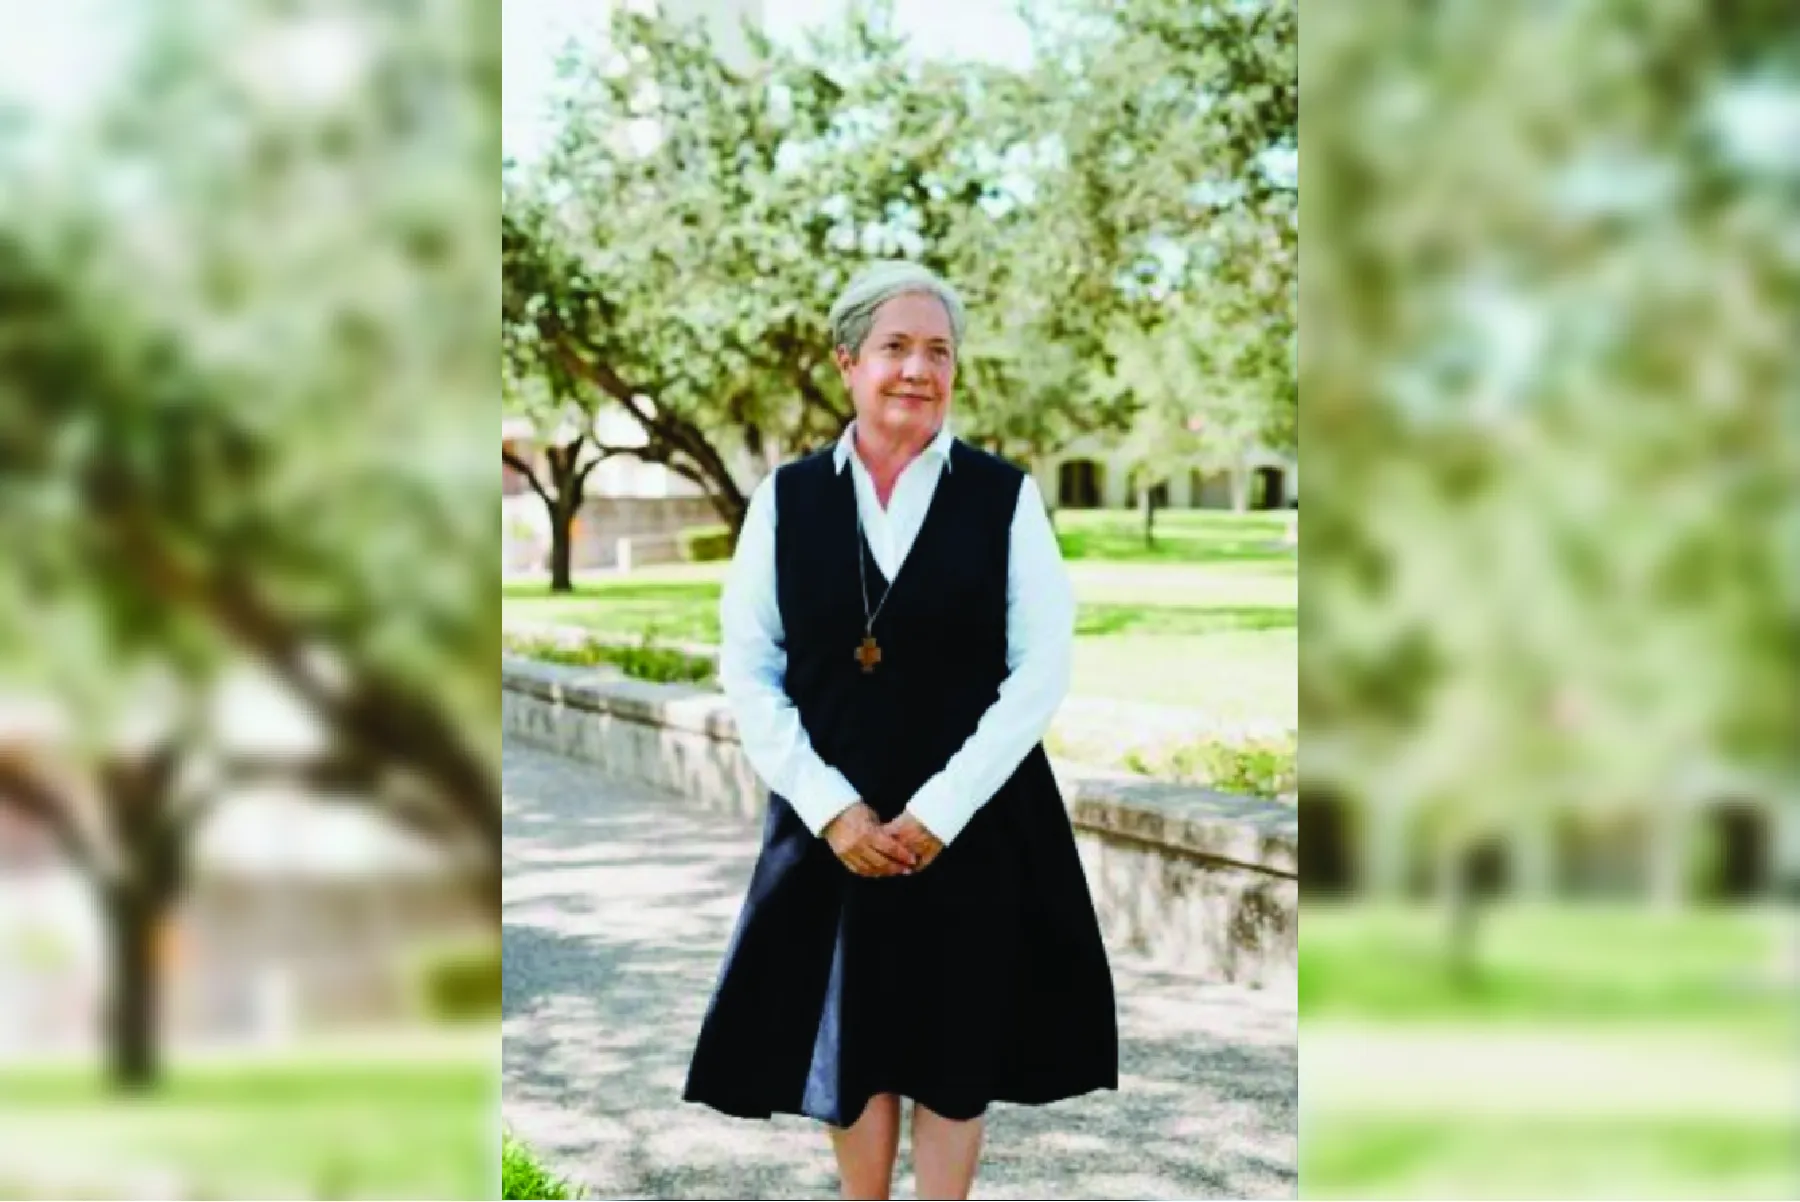 Sister Norma Pimentel of Catholic Charities of the Rio Grande Valley?w=200&h=150